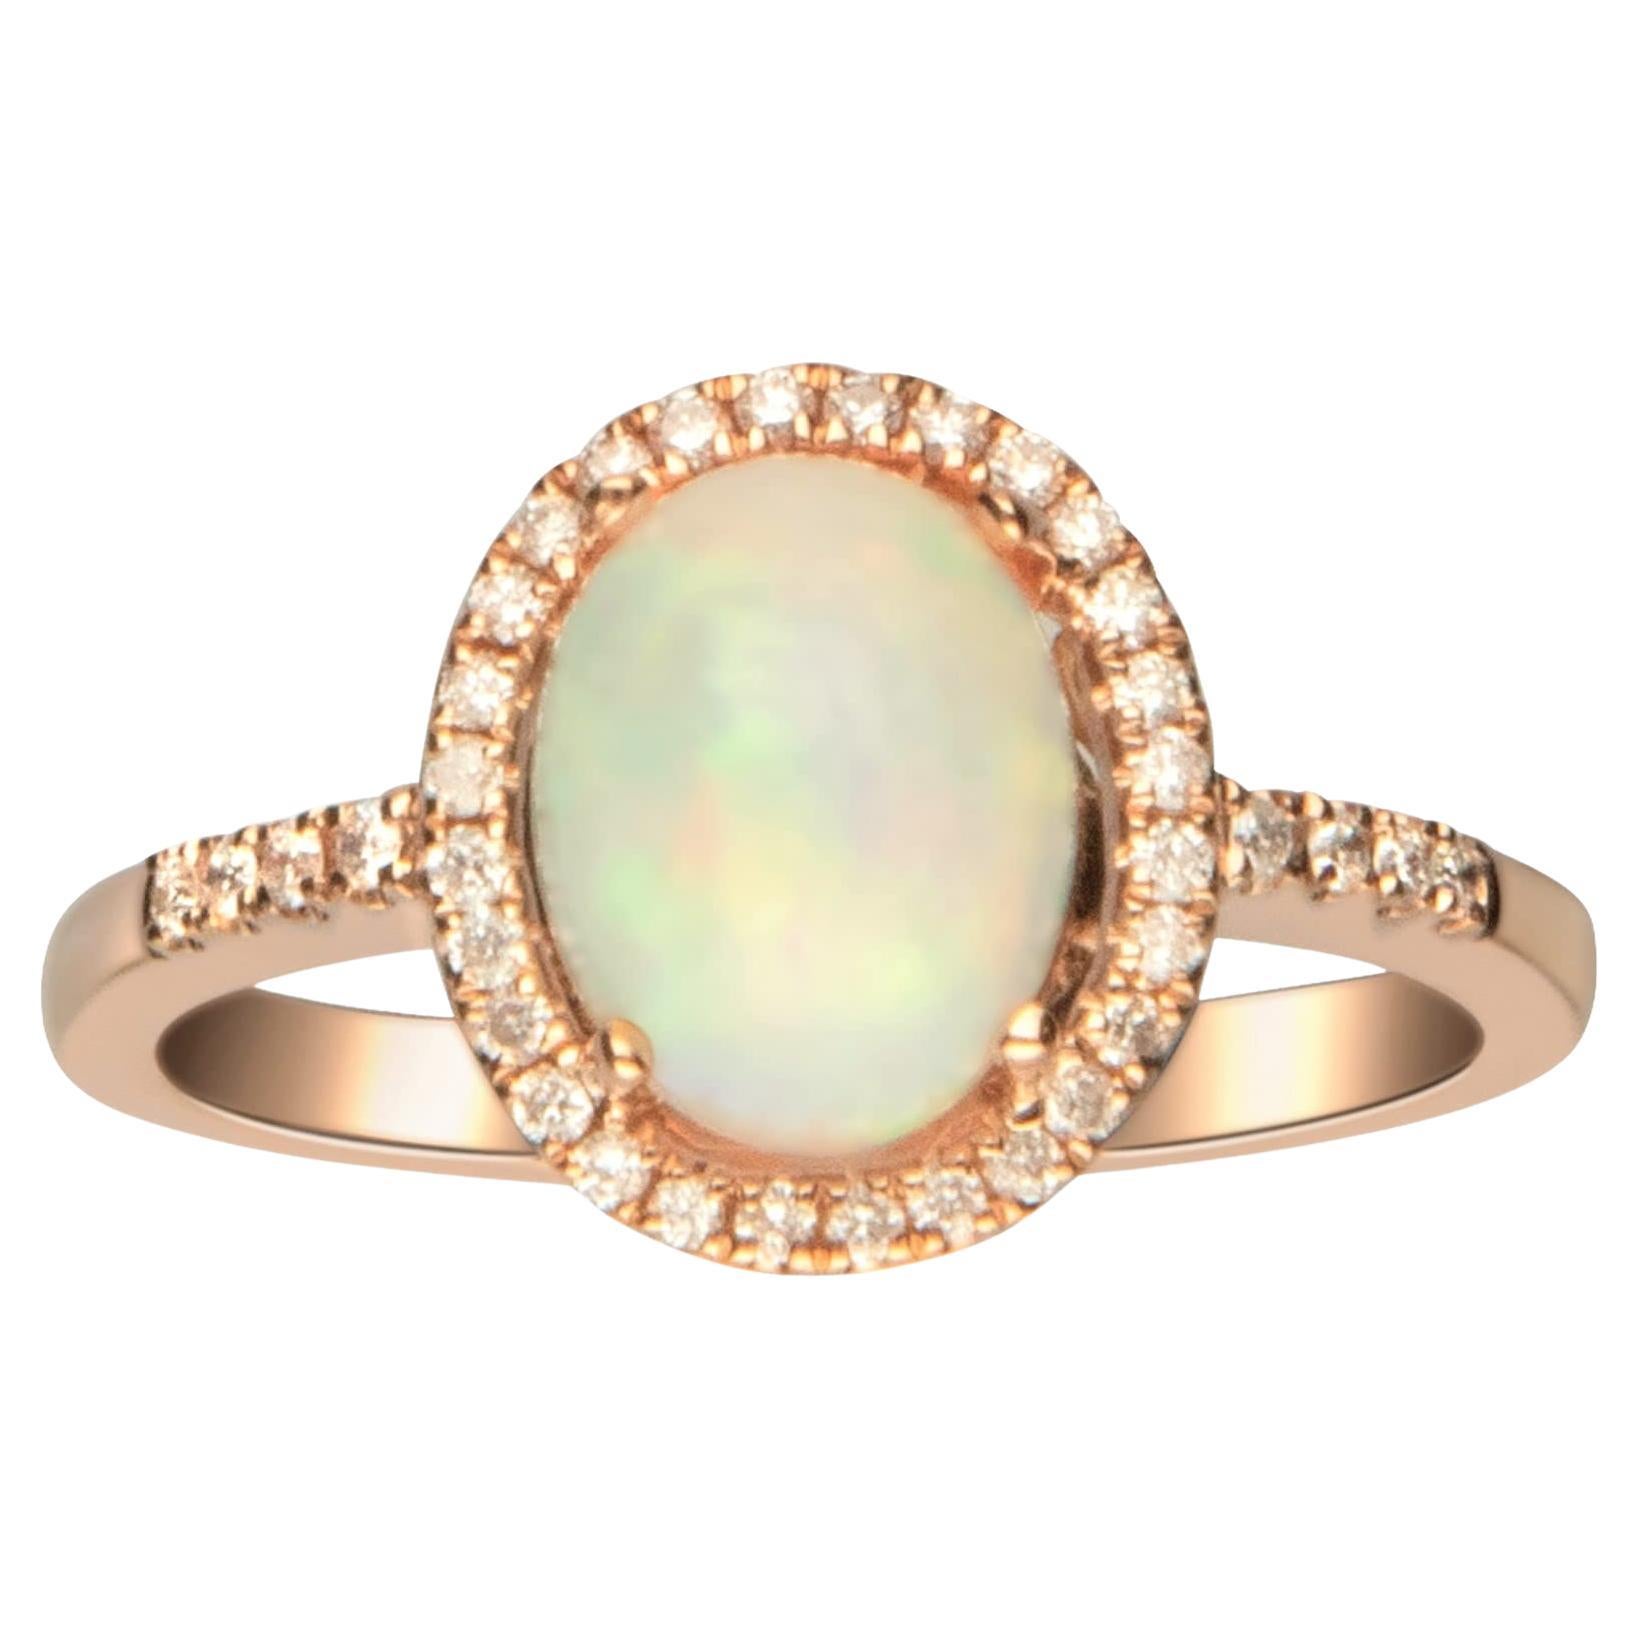 1.37 Carat Oval-Cab Ethiopian Opal Diamond Accents 14K Yellow Gold Ring